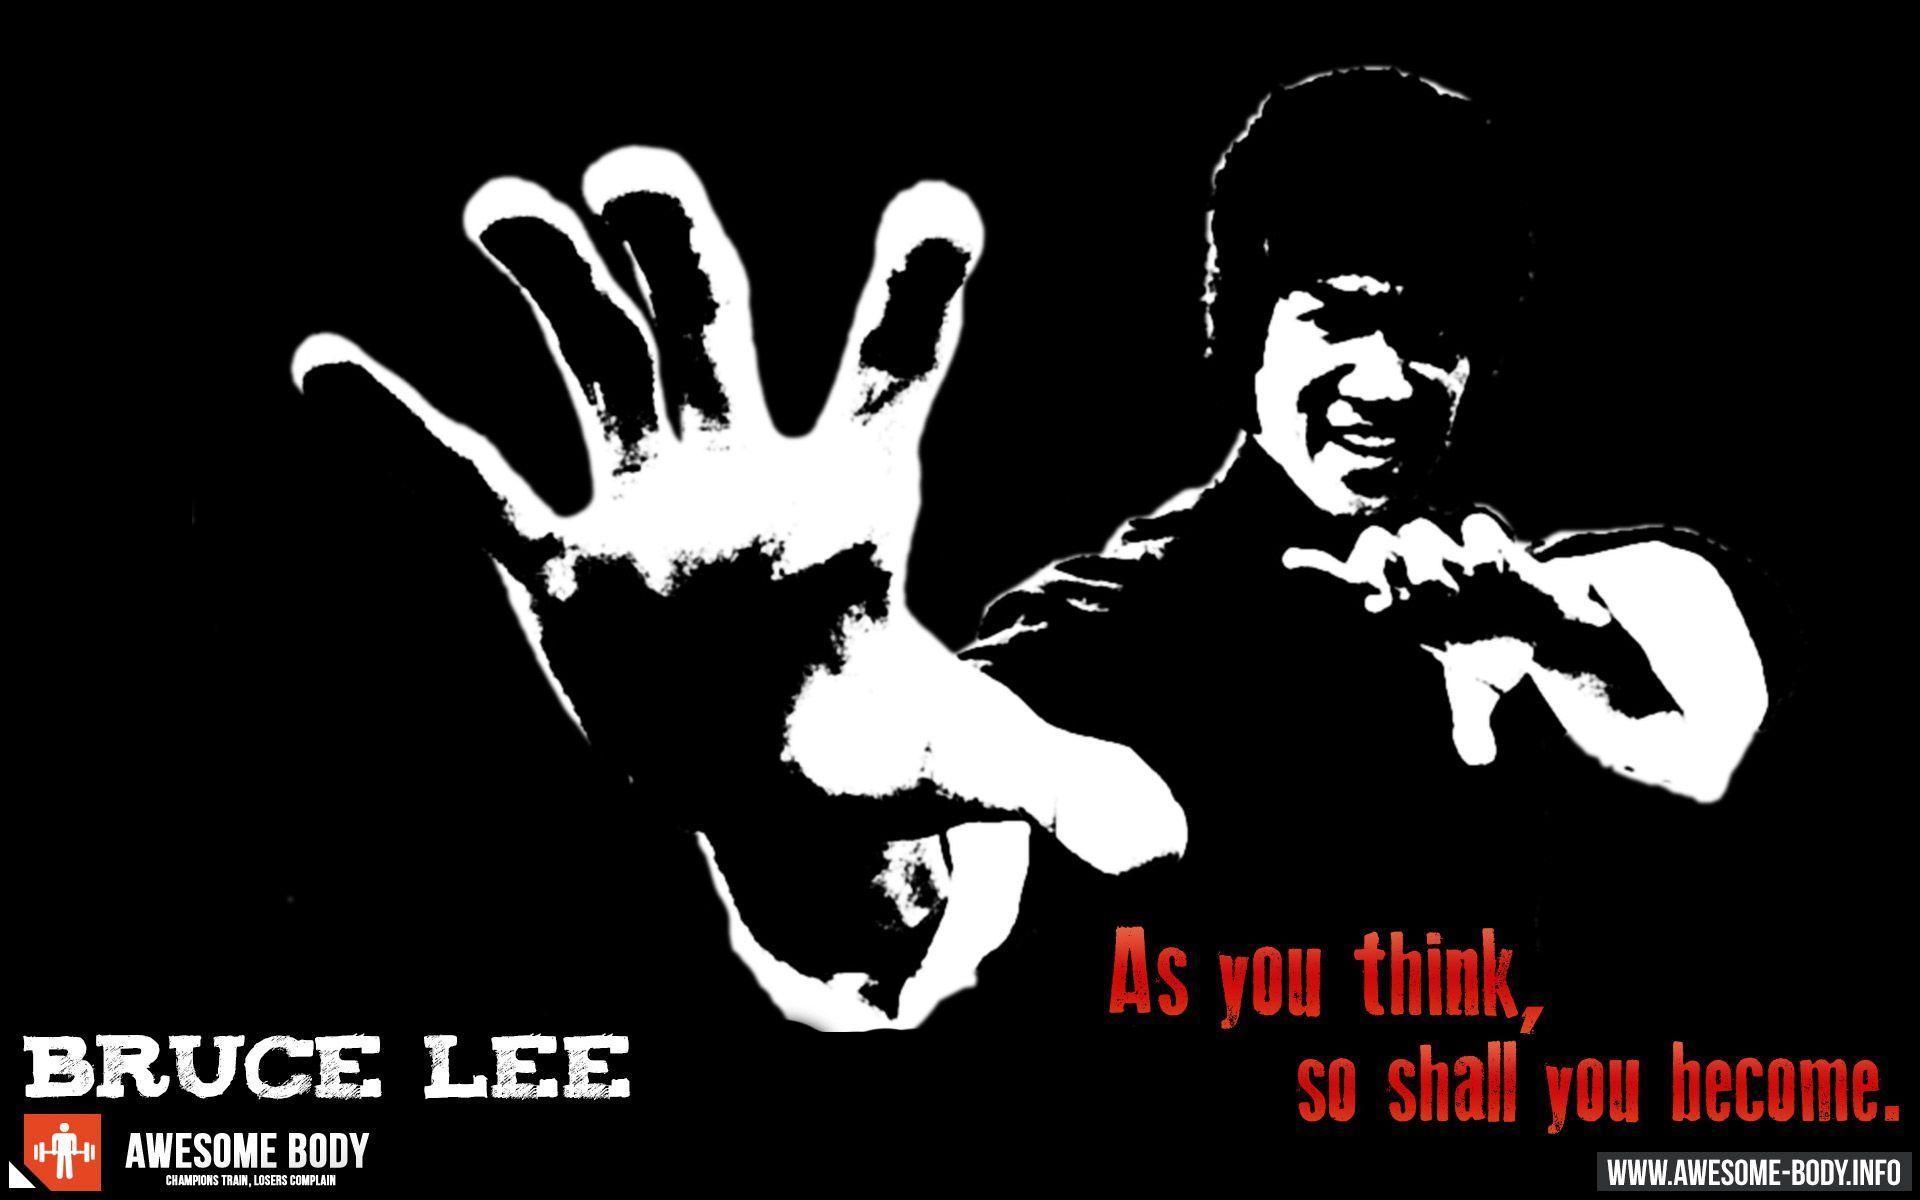 Bruce Lee Wallpaper. HD Awesome Body